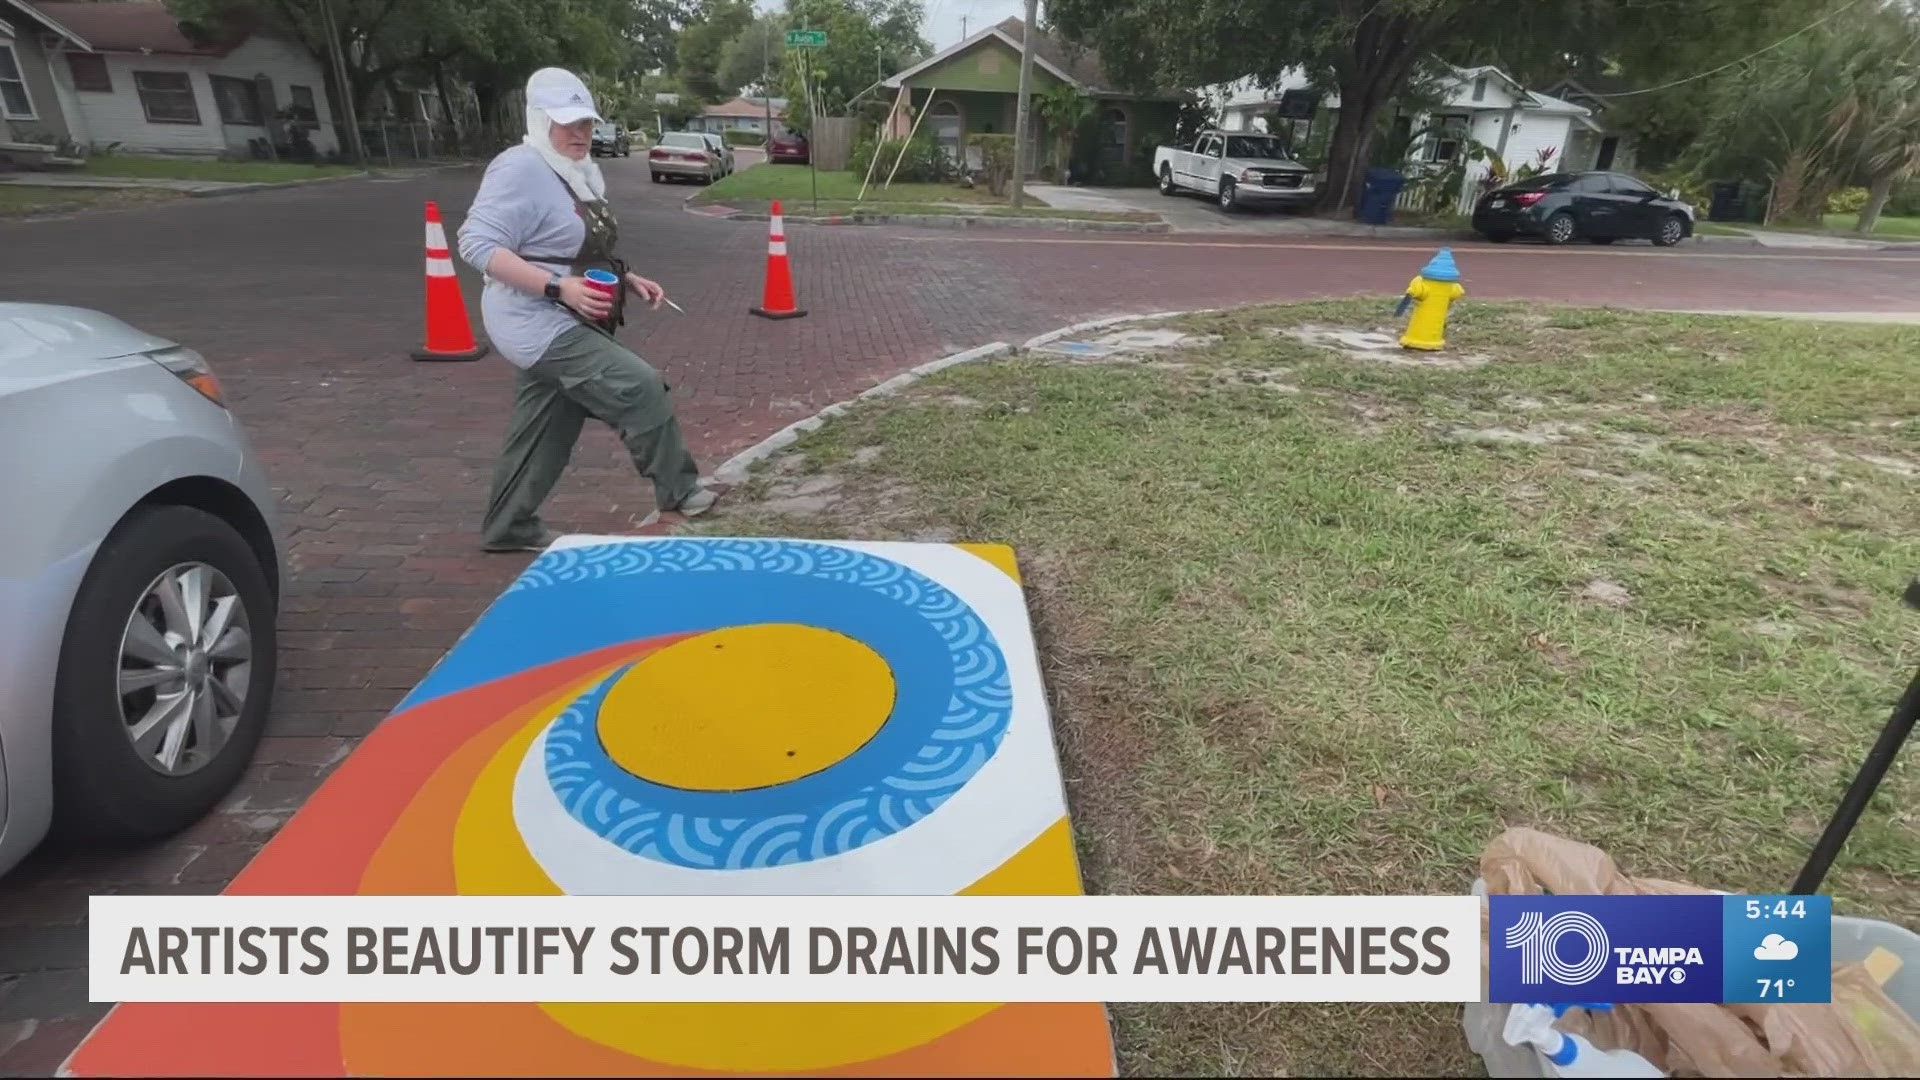 The works of art won’t just be pretty to look at, they also serve a purpose, letting people know what goes down the drain will end up in Tampa Bay.